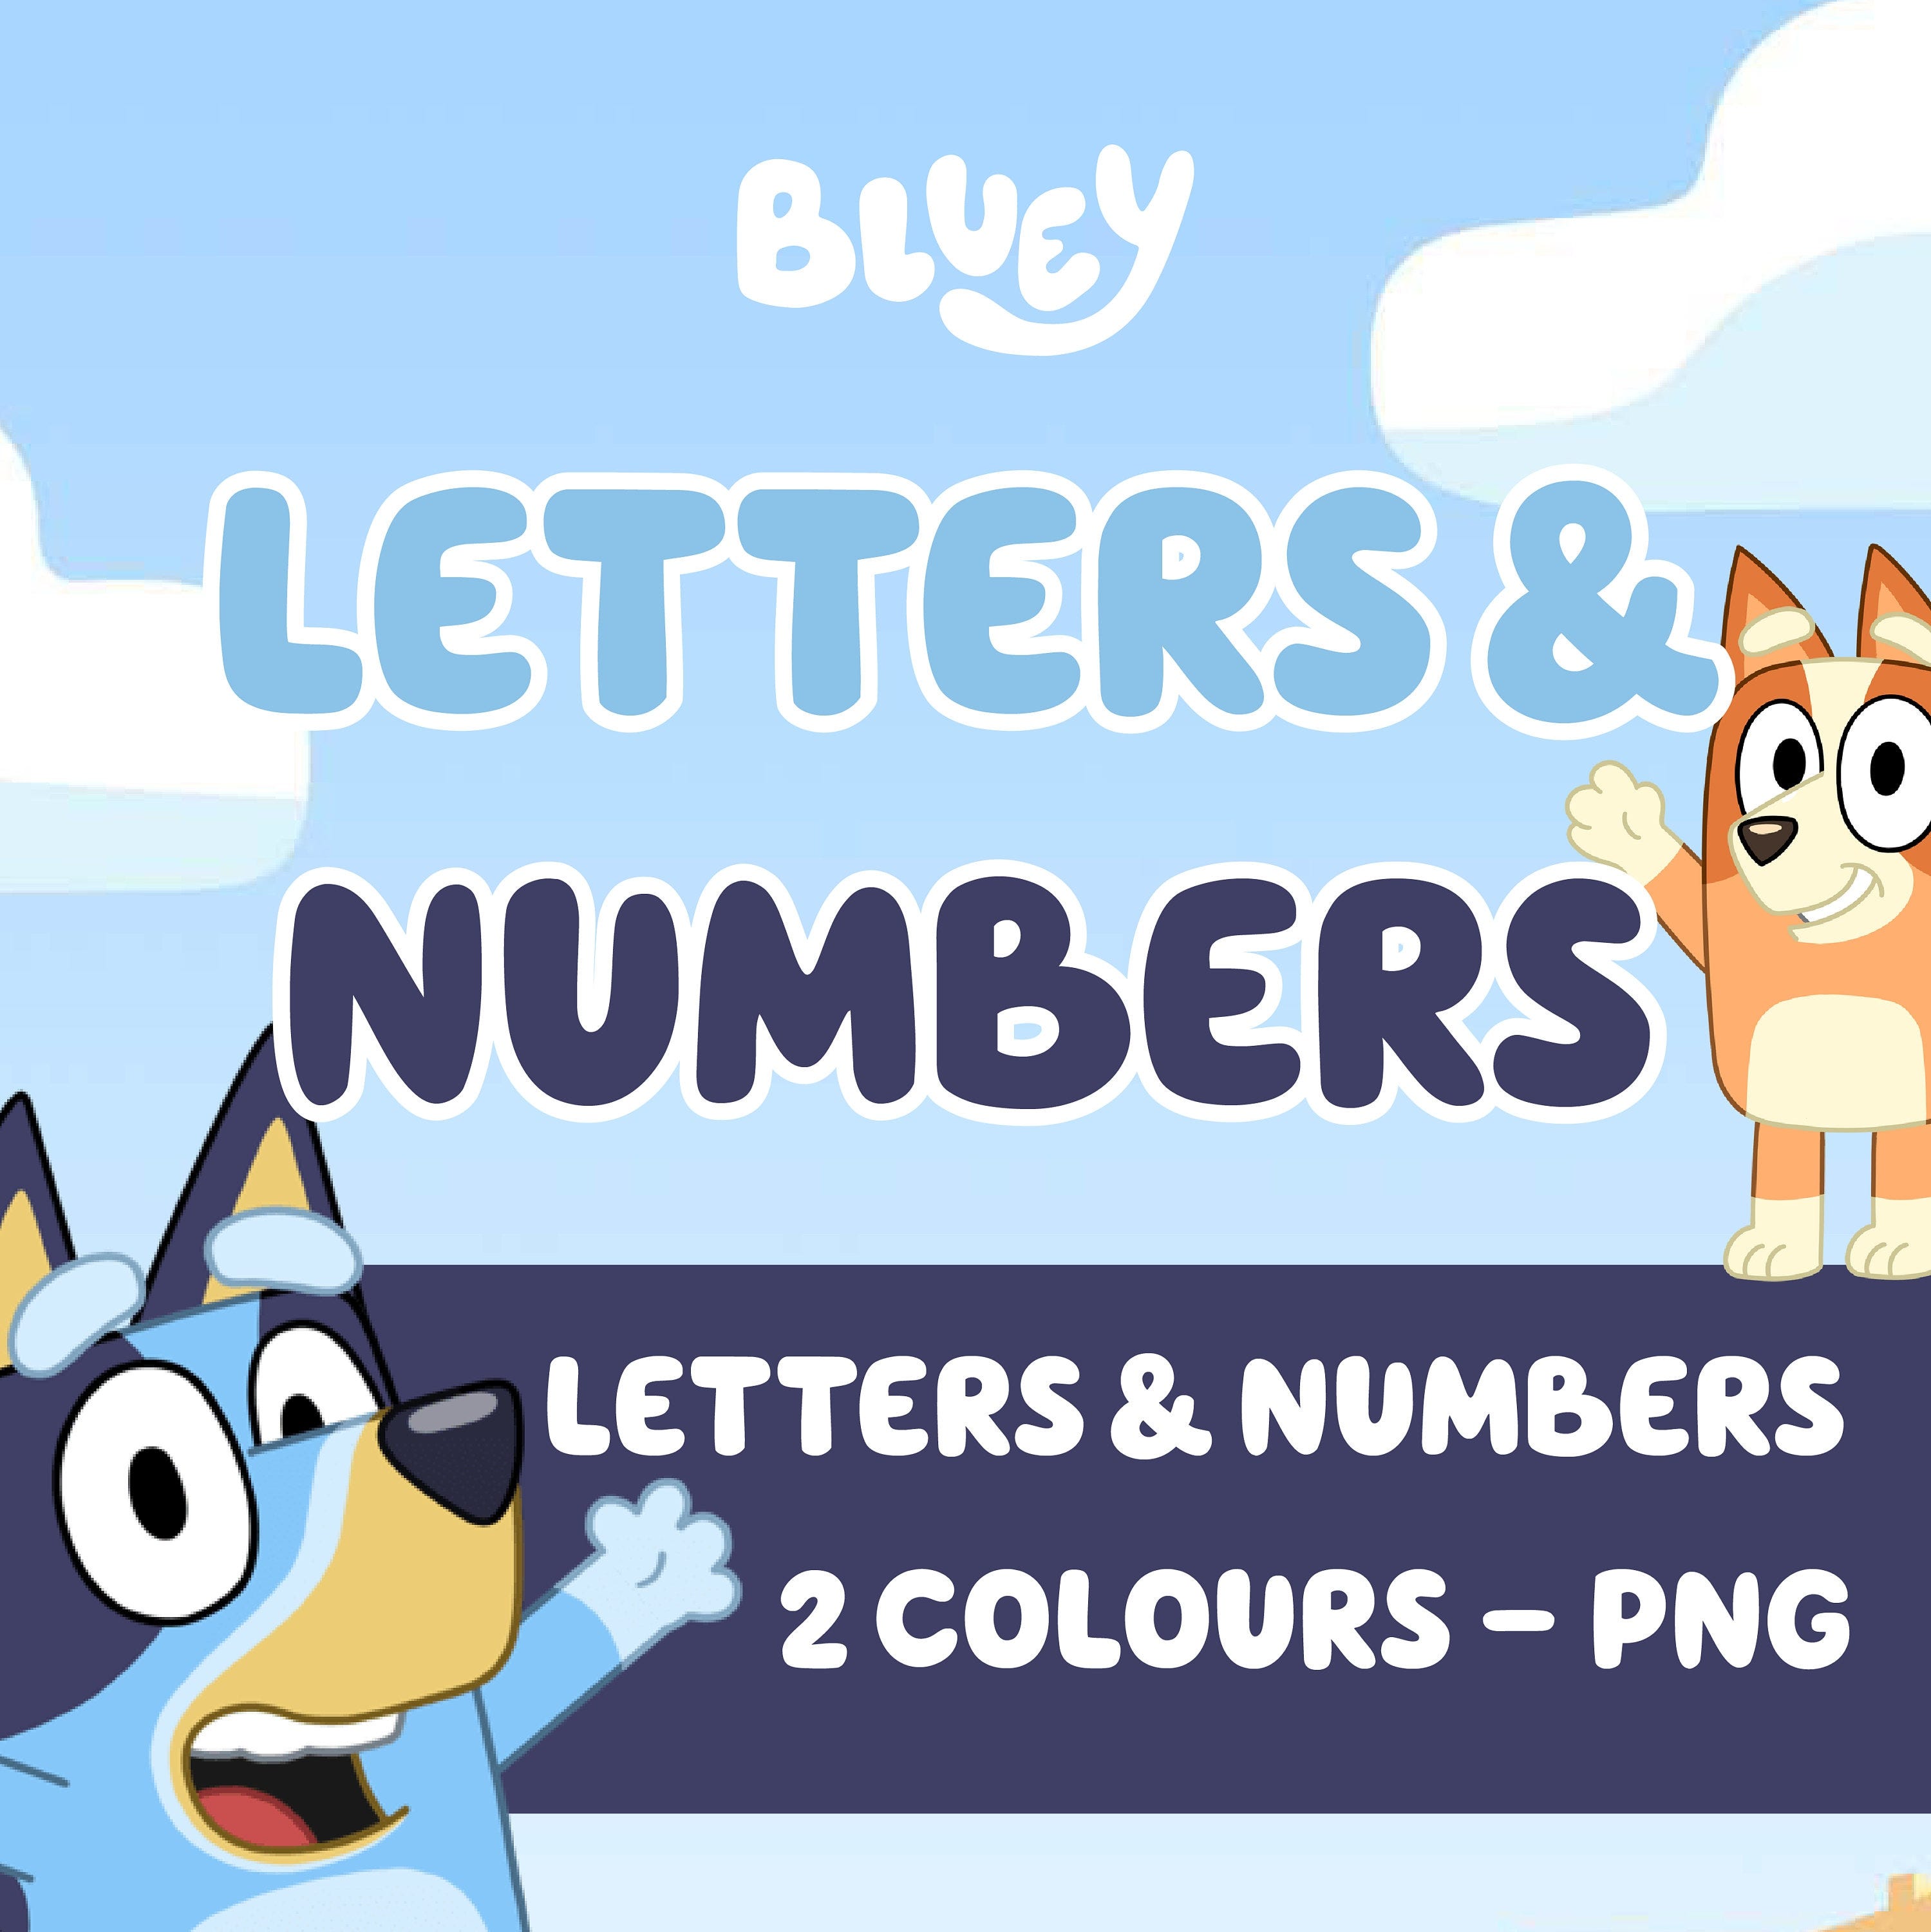 Bluey Inspired Font & PNG | Bluey Inspired Text